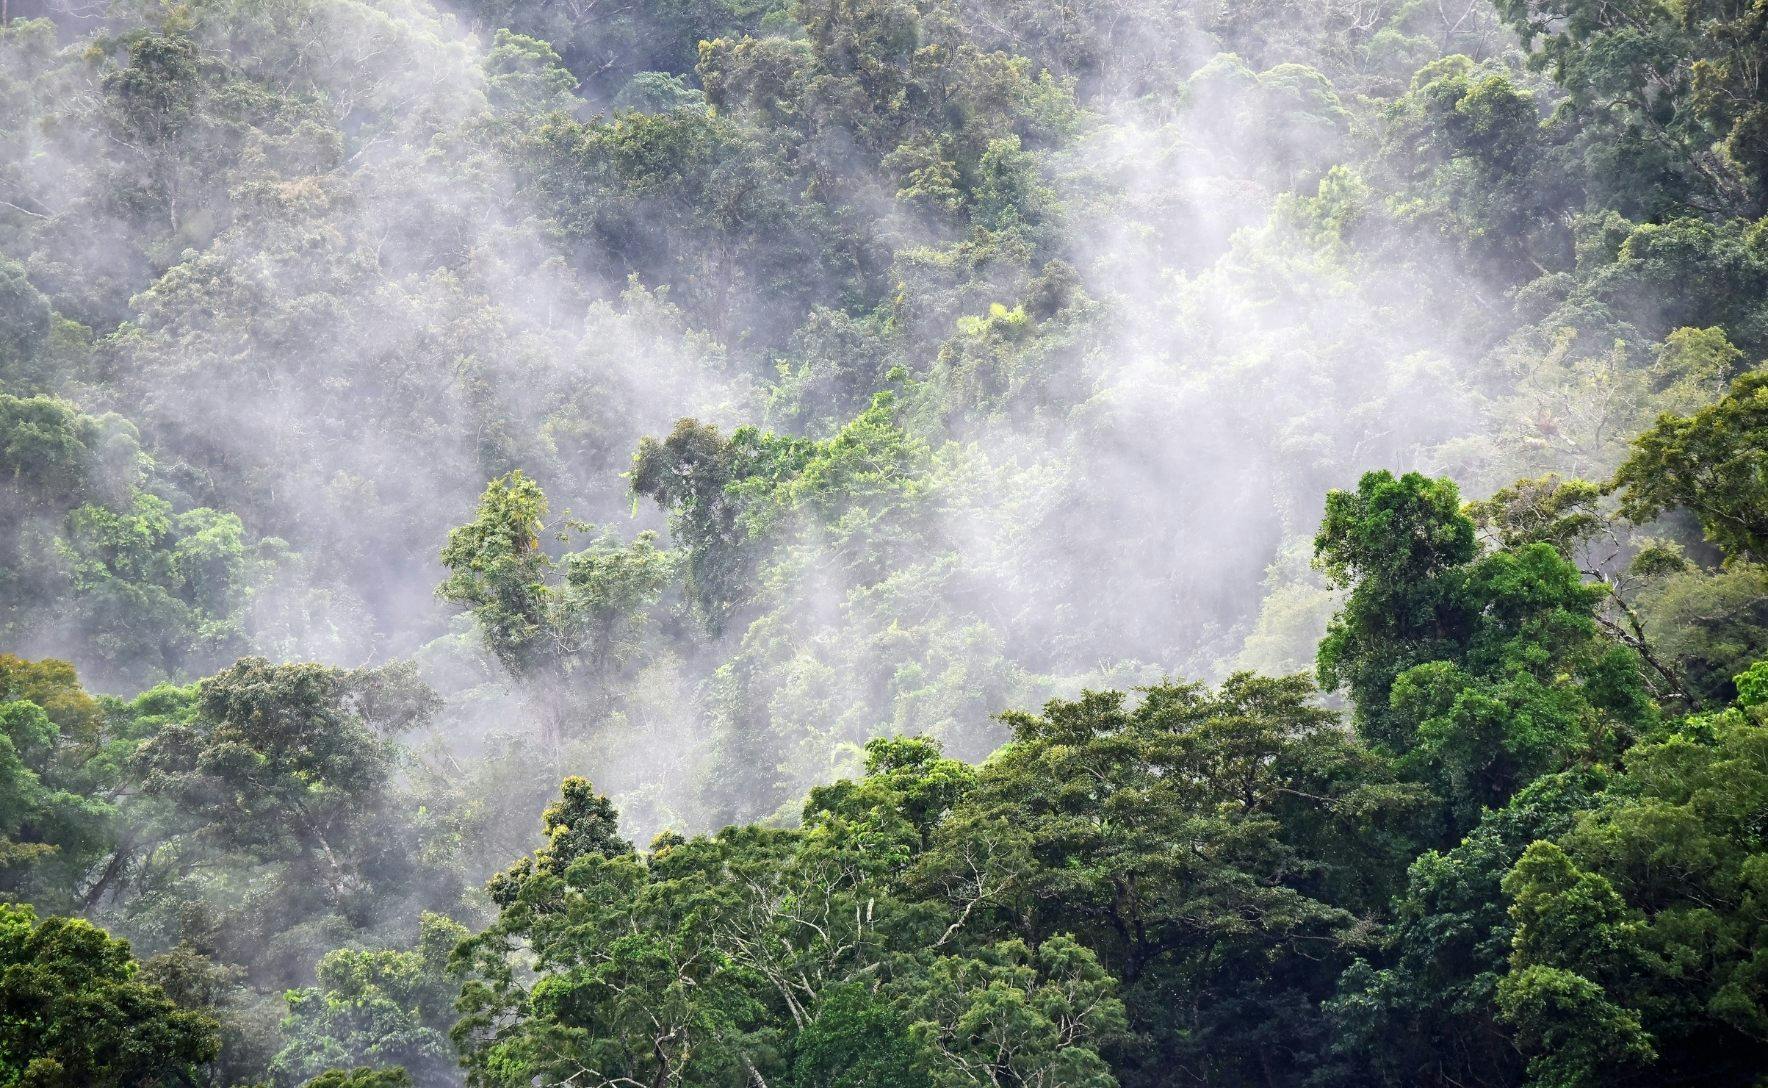 fog lying above a tree canopy. The trees are green and the image is an aerial shot.